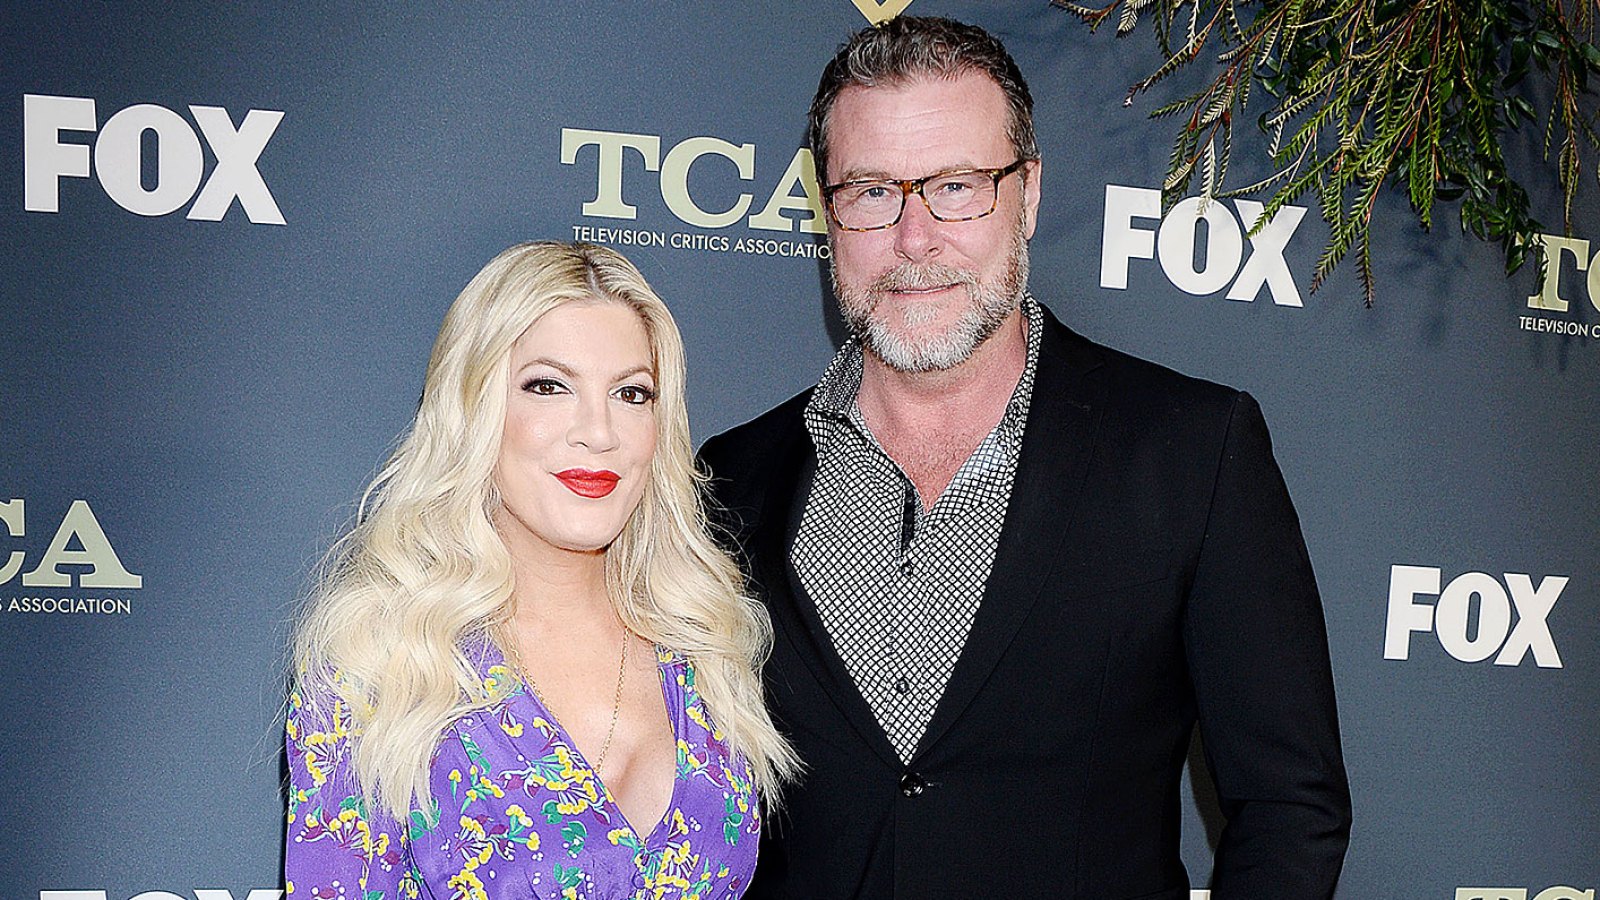 Tori Spelling and Dean McDermott Make Rare Public Appearance Together in Labor Day Weekend Outing